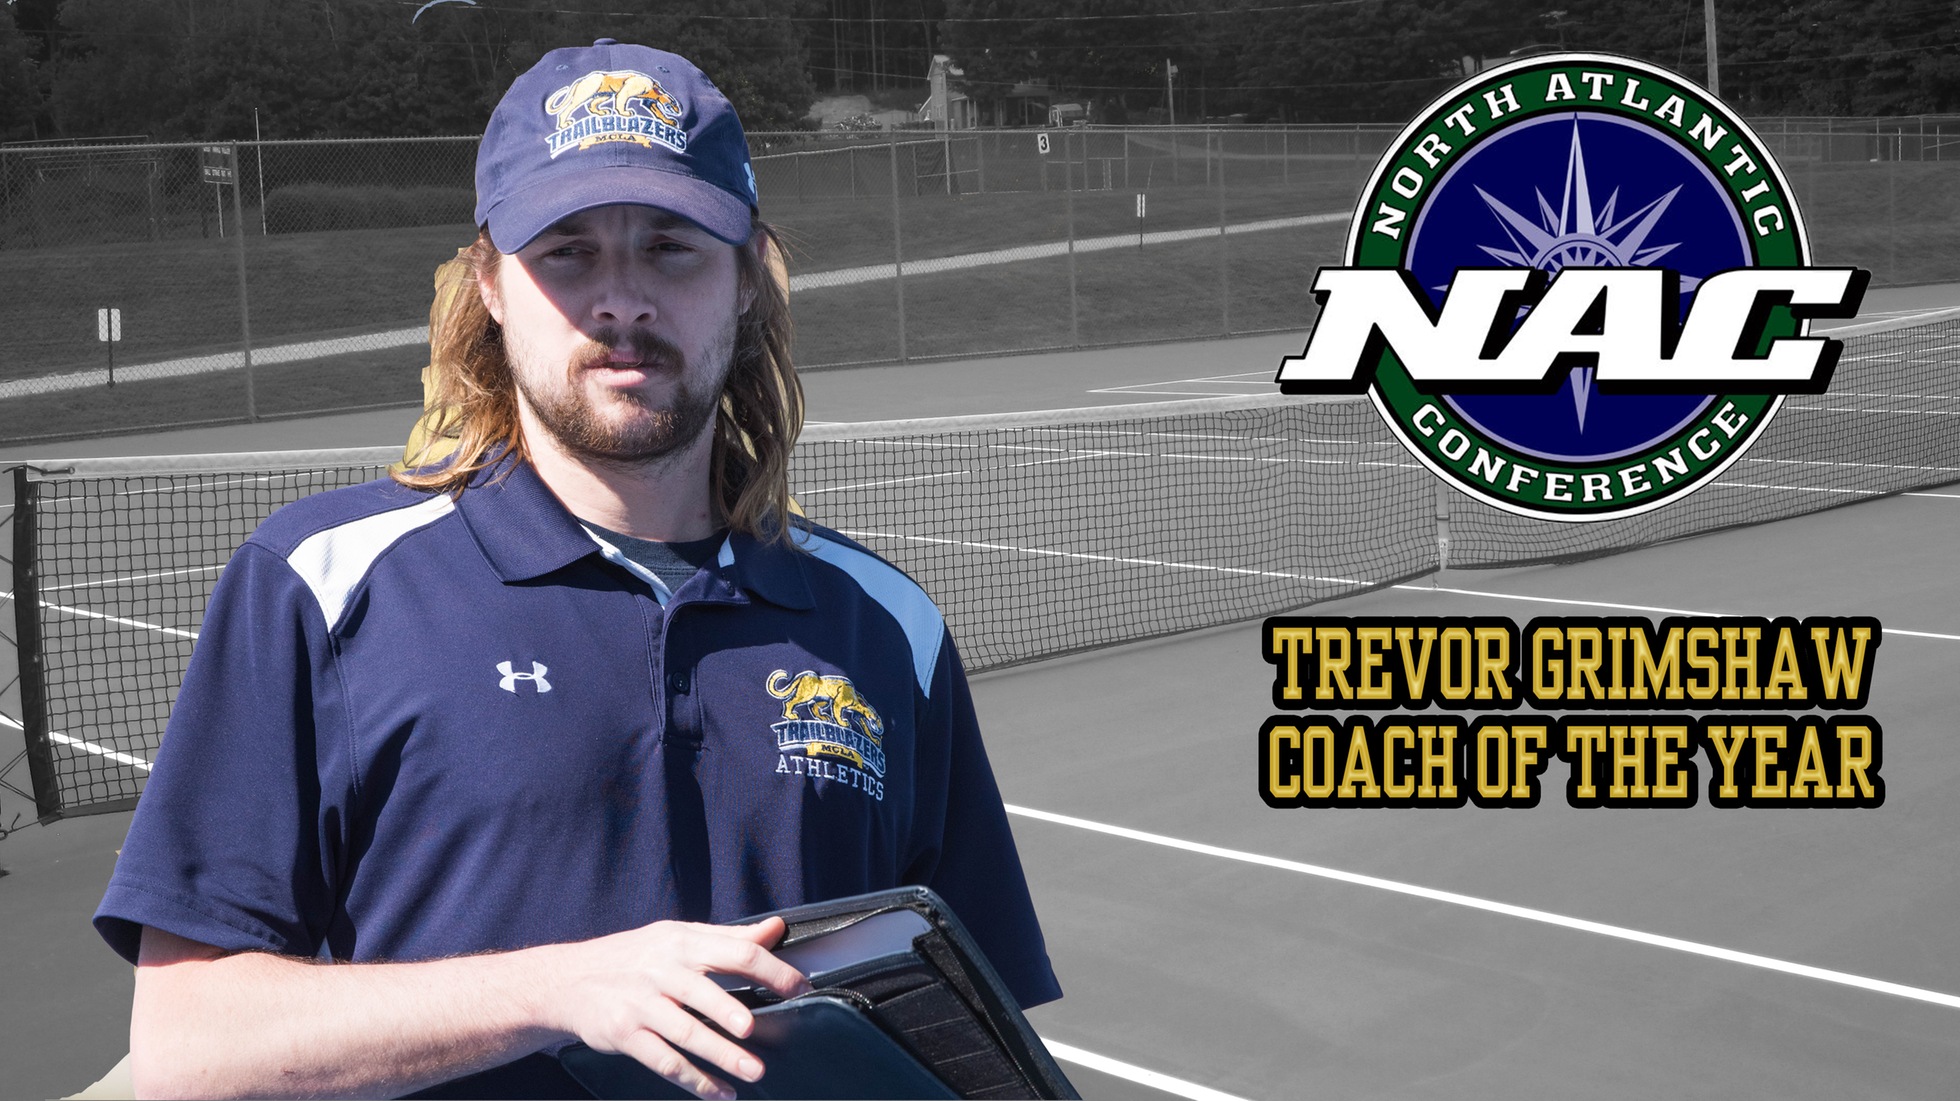 Grimshaw named North Atlantic Conference (NAC) Coach of the Year in Men's Tennis